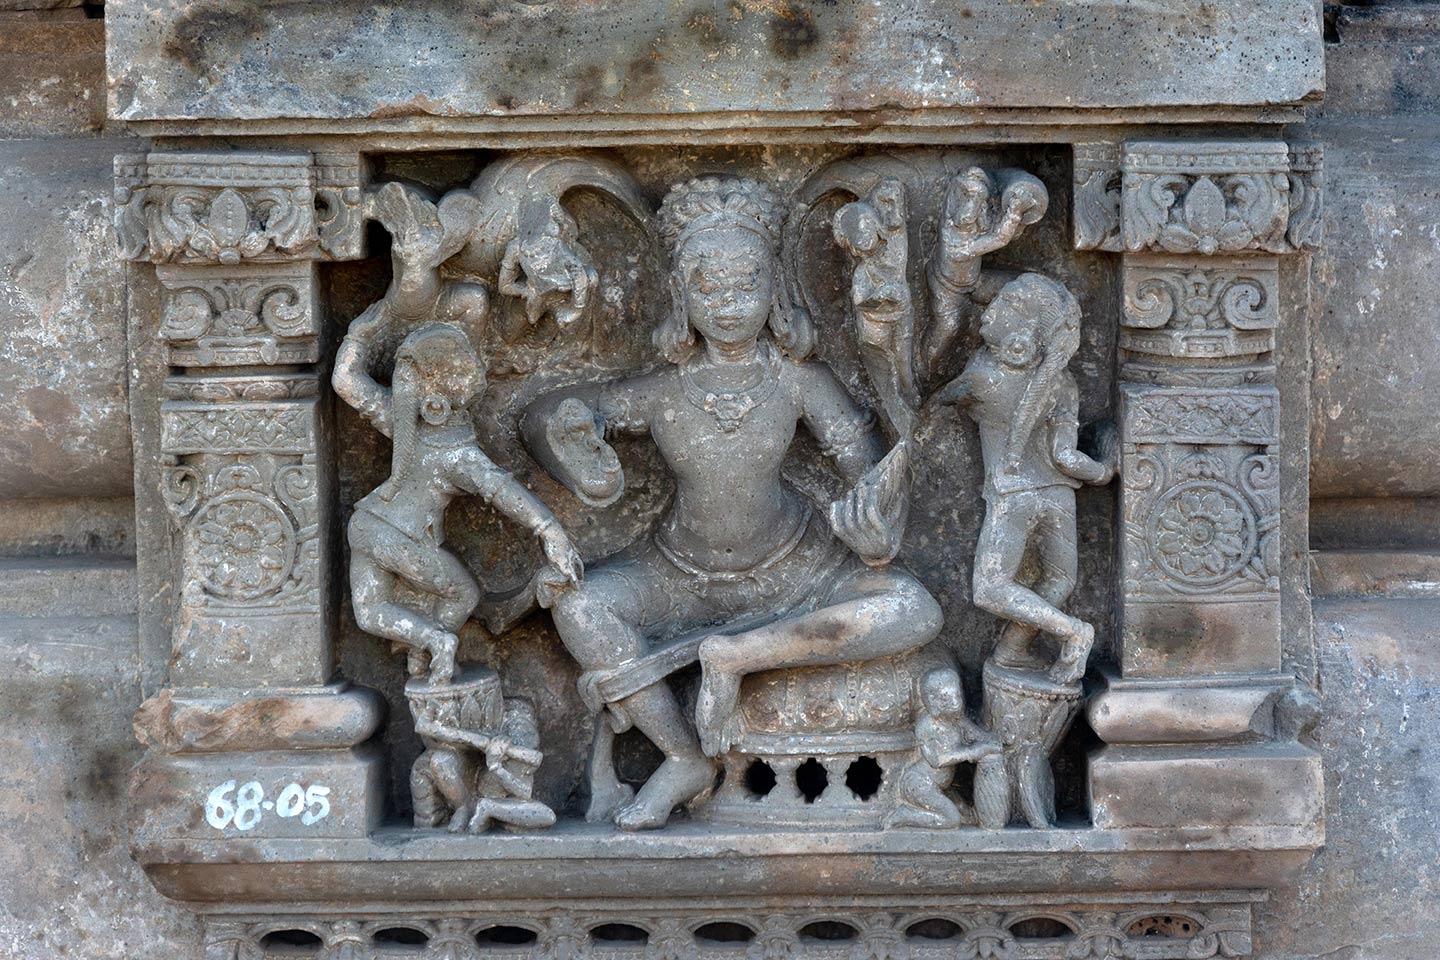 A male figure surrounded by dancers and musicians is framed in panels with pillars and tiered shikhara with gavaksha (horseshoe) motifs. Two female dancers are balancing themselves on big drums on either side of the male figure. Small figures of musicians are holding the base of the drums. The one on the left is playing the flute. Four small figures appear at the top, playing cymbals, two on either side of the male figure.